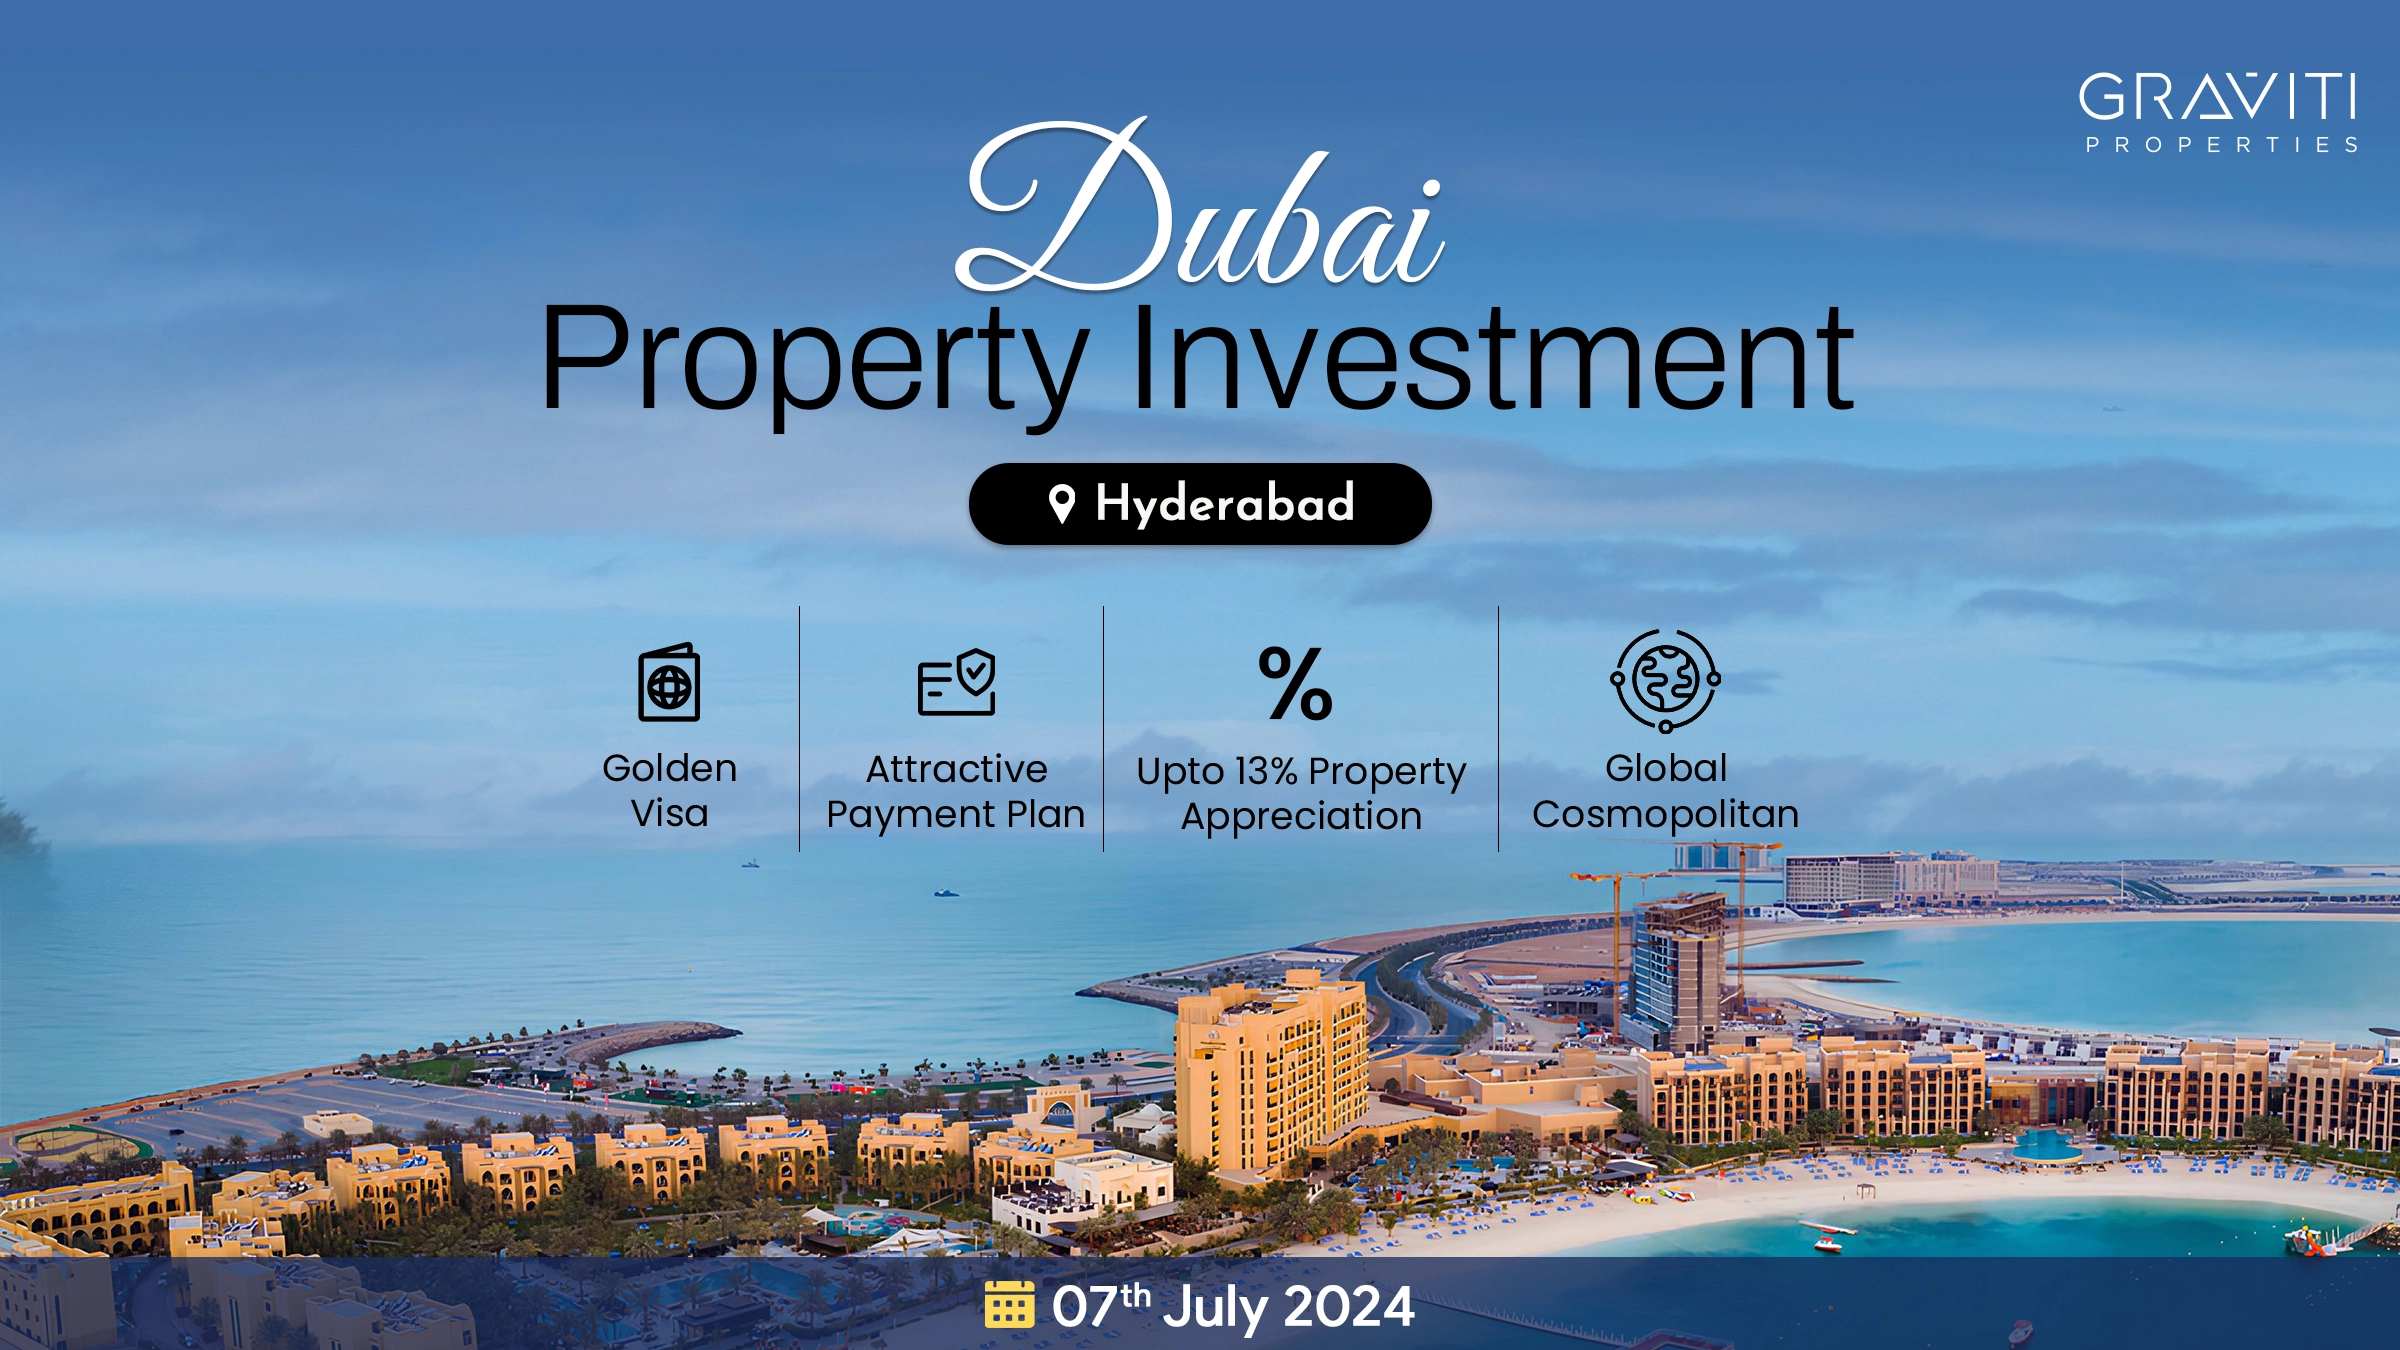 Dubai Property Investment Opportunity – Hyderabad